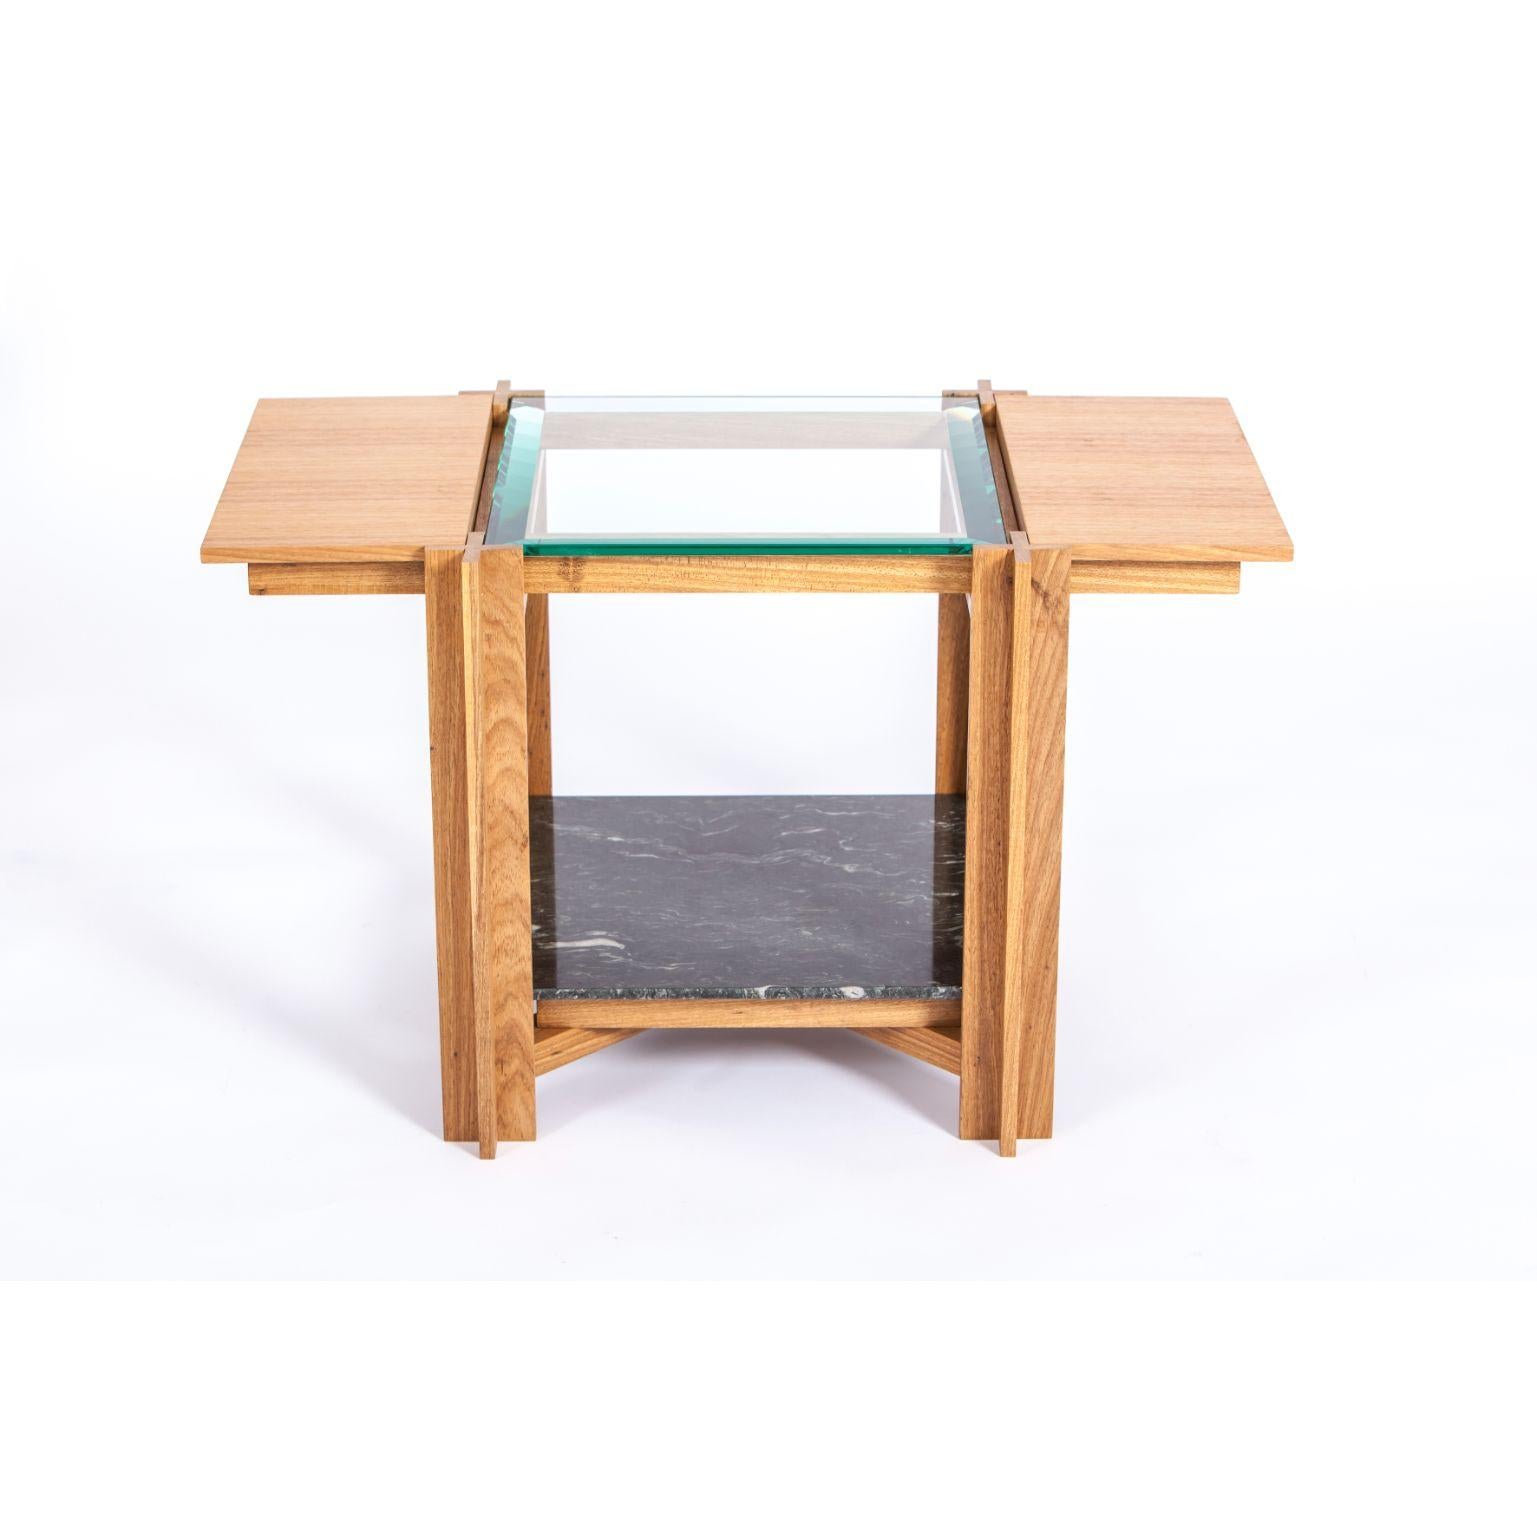 Modern Mais, Light Freijo Table with Tabs, by Alva Design